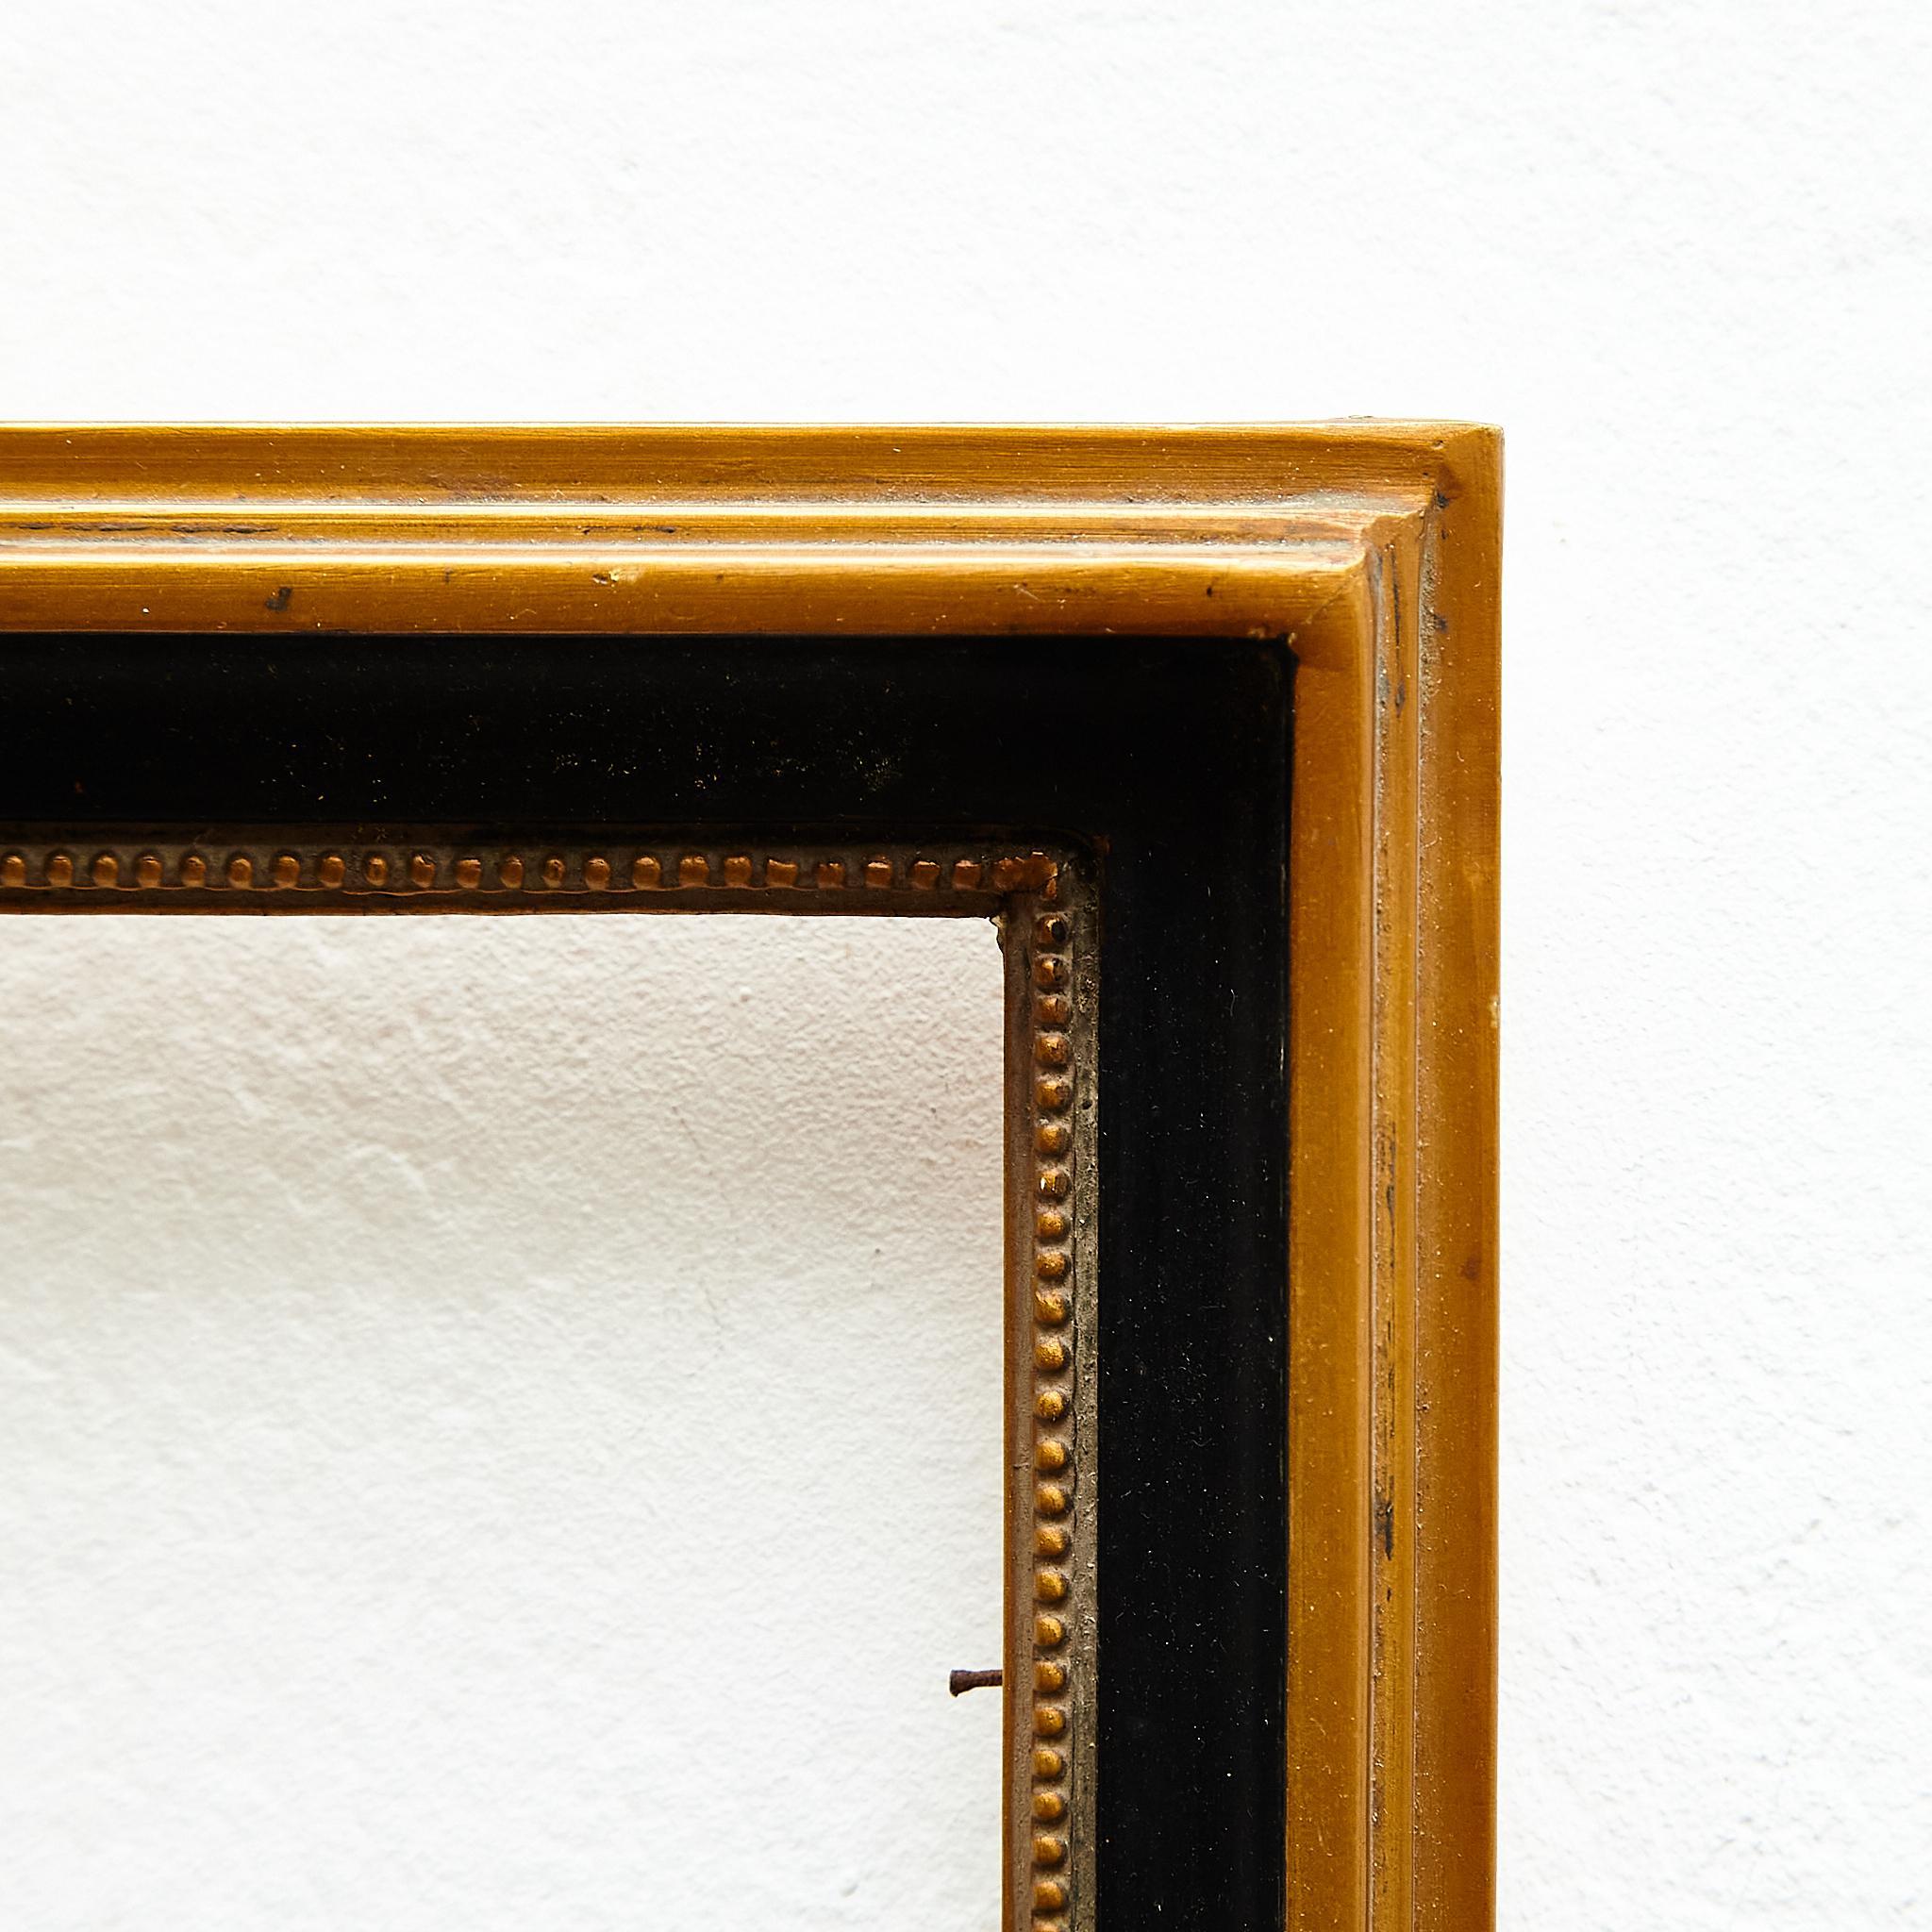 Antique Hand-Painted Wood Frame, circa 1950 For Sale 2